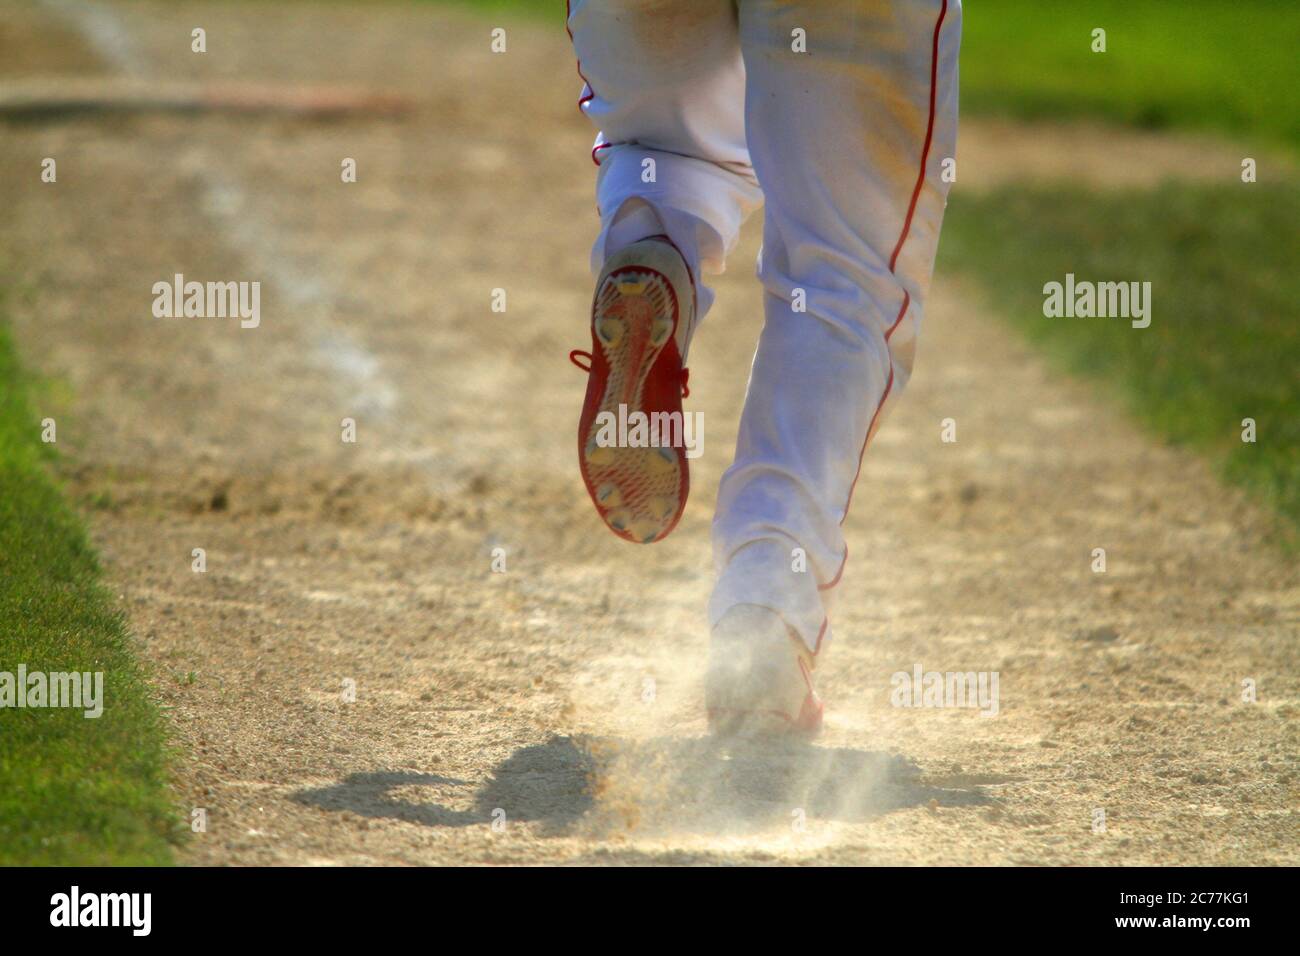 A baseball player breaks out of the batters box after hitting the ball. Stock Photo